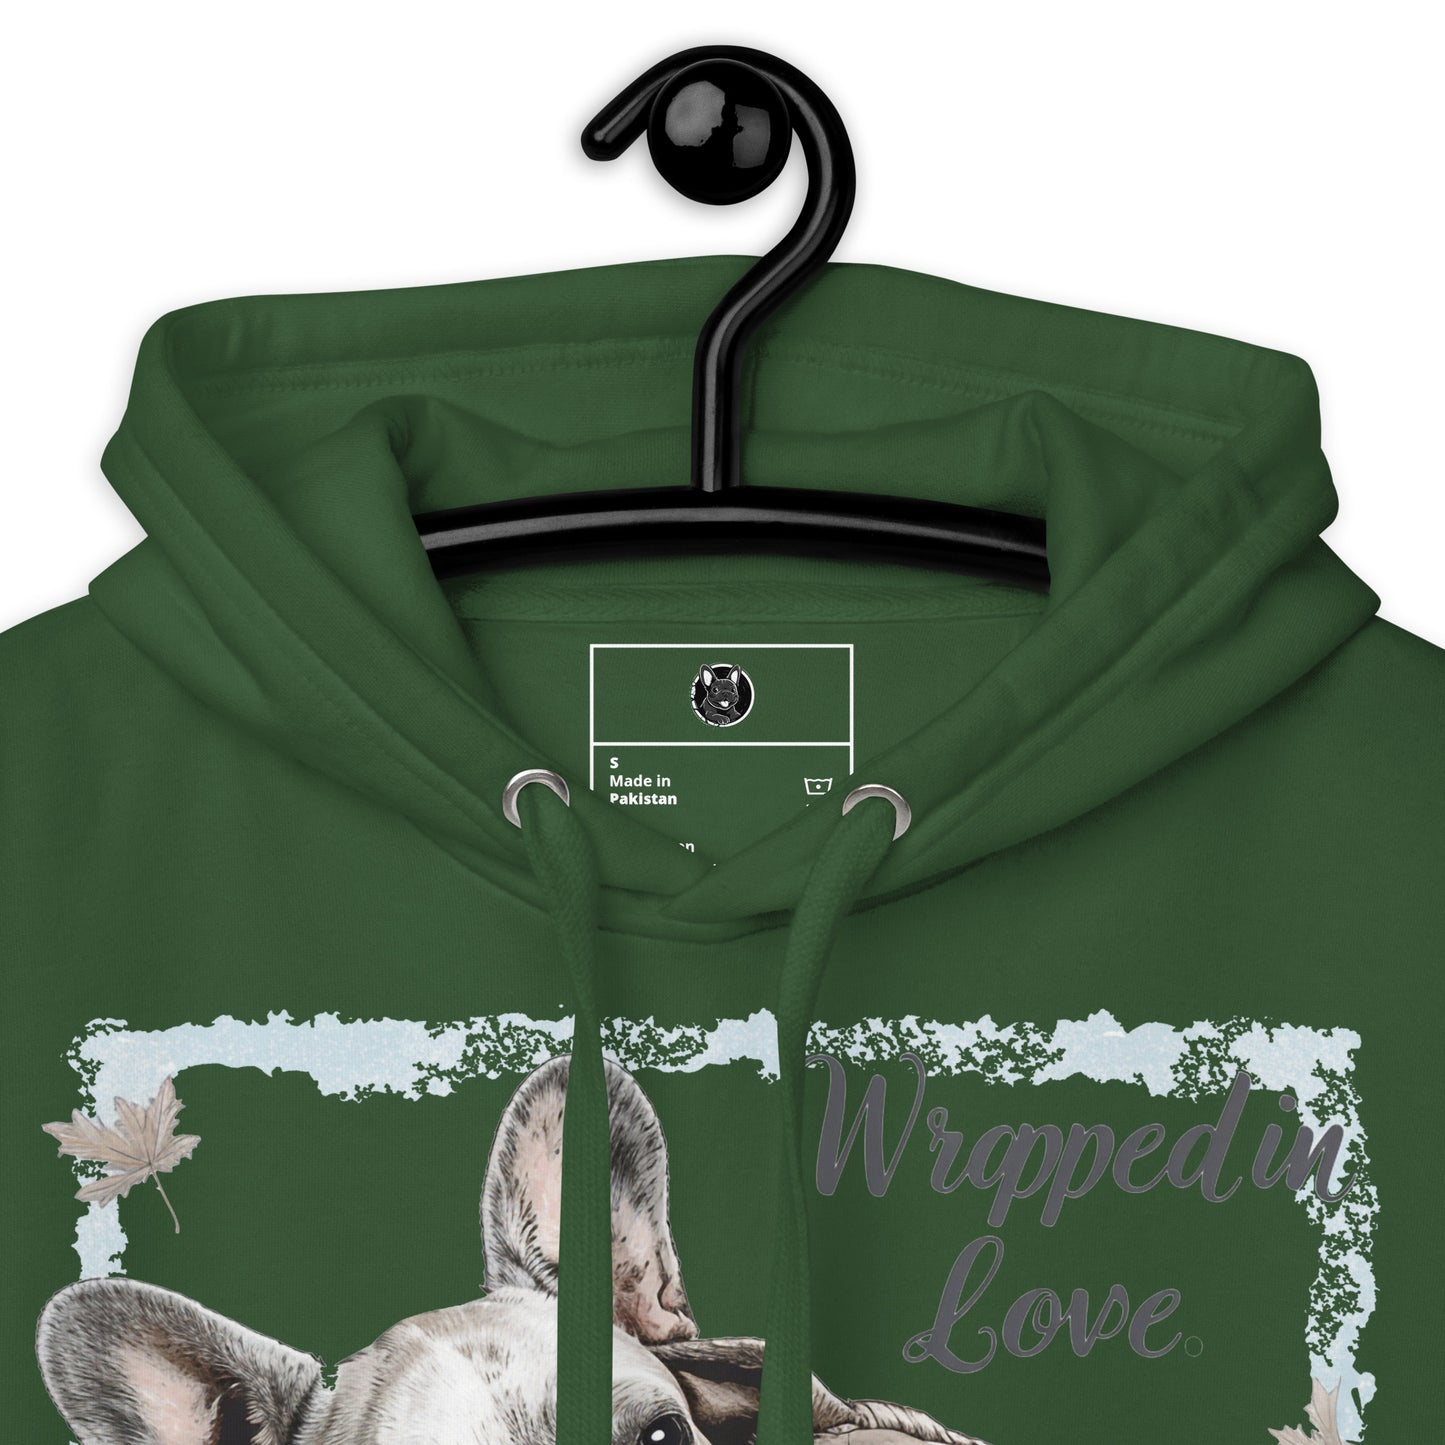 Wrapped in Love" Unisex Hoodie